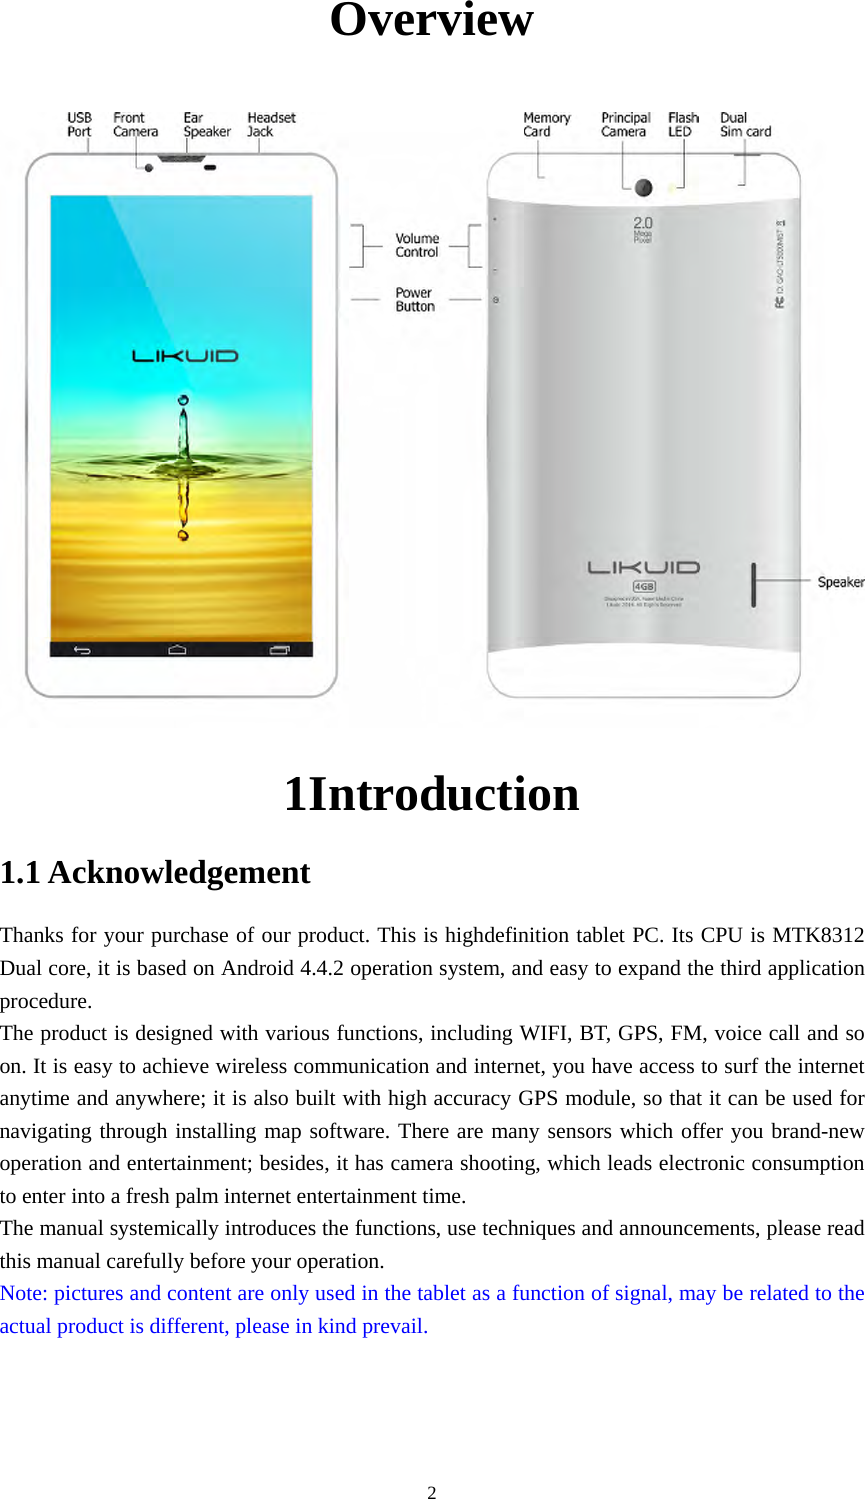  2Overview           1Introduction 1.1 Acknowledgement Thanks for your purchase of our product. This is highdefinition tablet PC. Its CPU is MTK8312 Dual core, it is based on Android 4.4.2 operation system, and easy to expand the third application procedure. The product is designed with various functions, including WIFI, BT, GPS, FM, voice call and so on. It is easy to achieve wireless communication and internet, you have access to surf the internet anytime and anywhere; it is also built with high accuracy GPS module, so that it can be used for navigating through installing map software. There are many sensors which offer you brand-new operation and entertainment; besides, it has camera shooting, which leads electronic consumption to enter into a fresh palm internet entertainment time.   The manual systemically introduces the functions, use techniques and announcements, please read this manual carefully before your operation. Note: pictures and content are only used in the tablet as a function of signal, may be related to the actual product is different, please in kind prevail. 